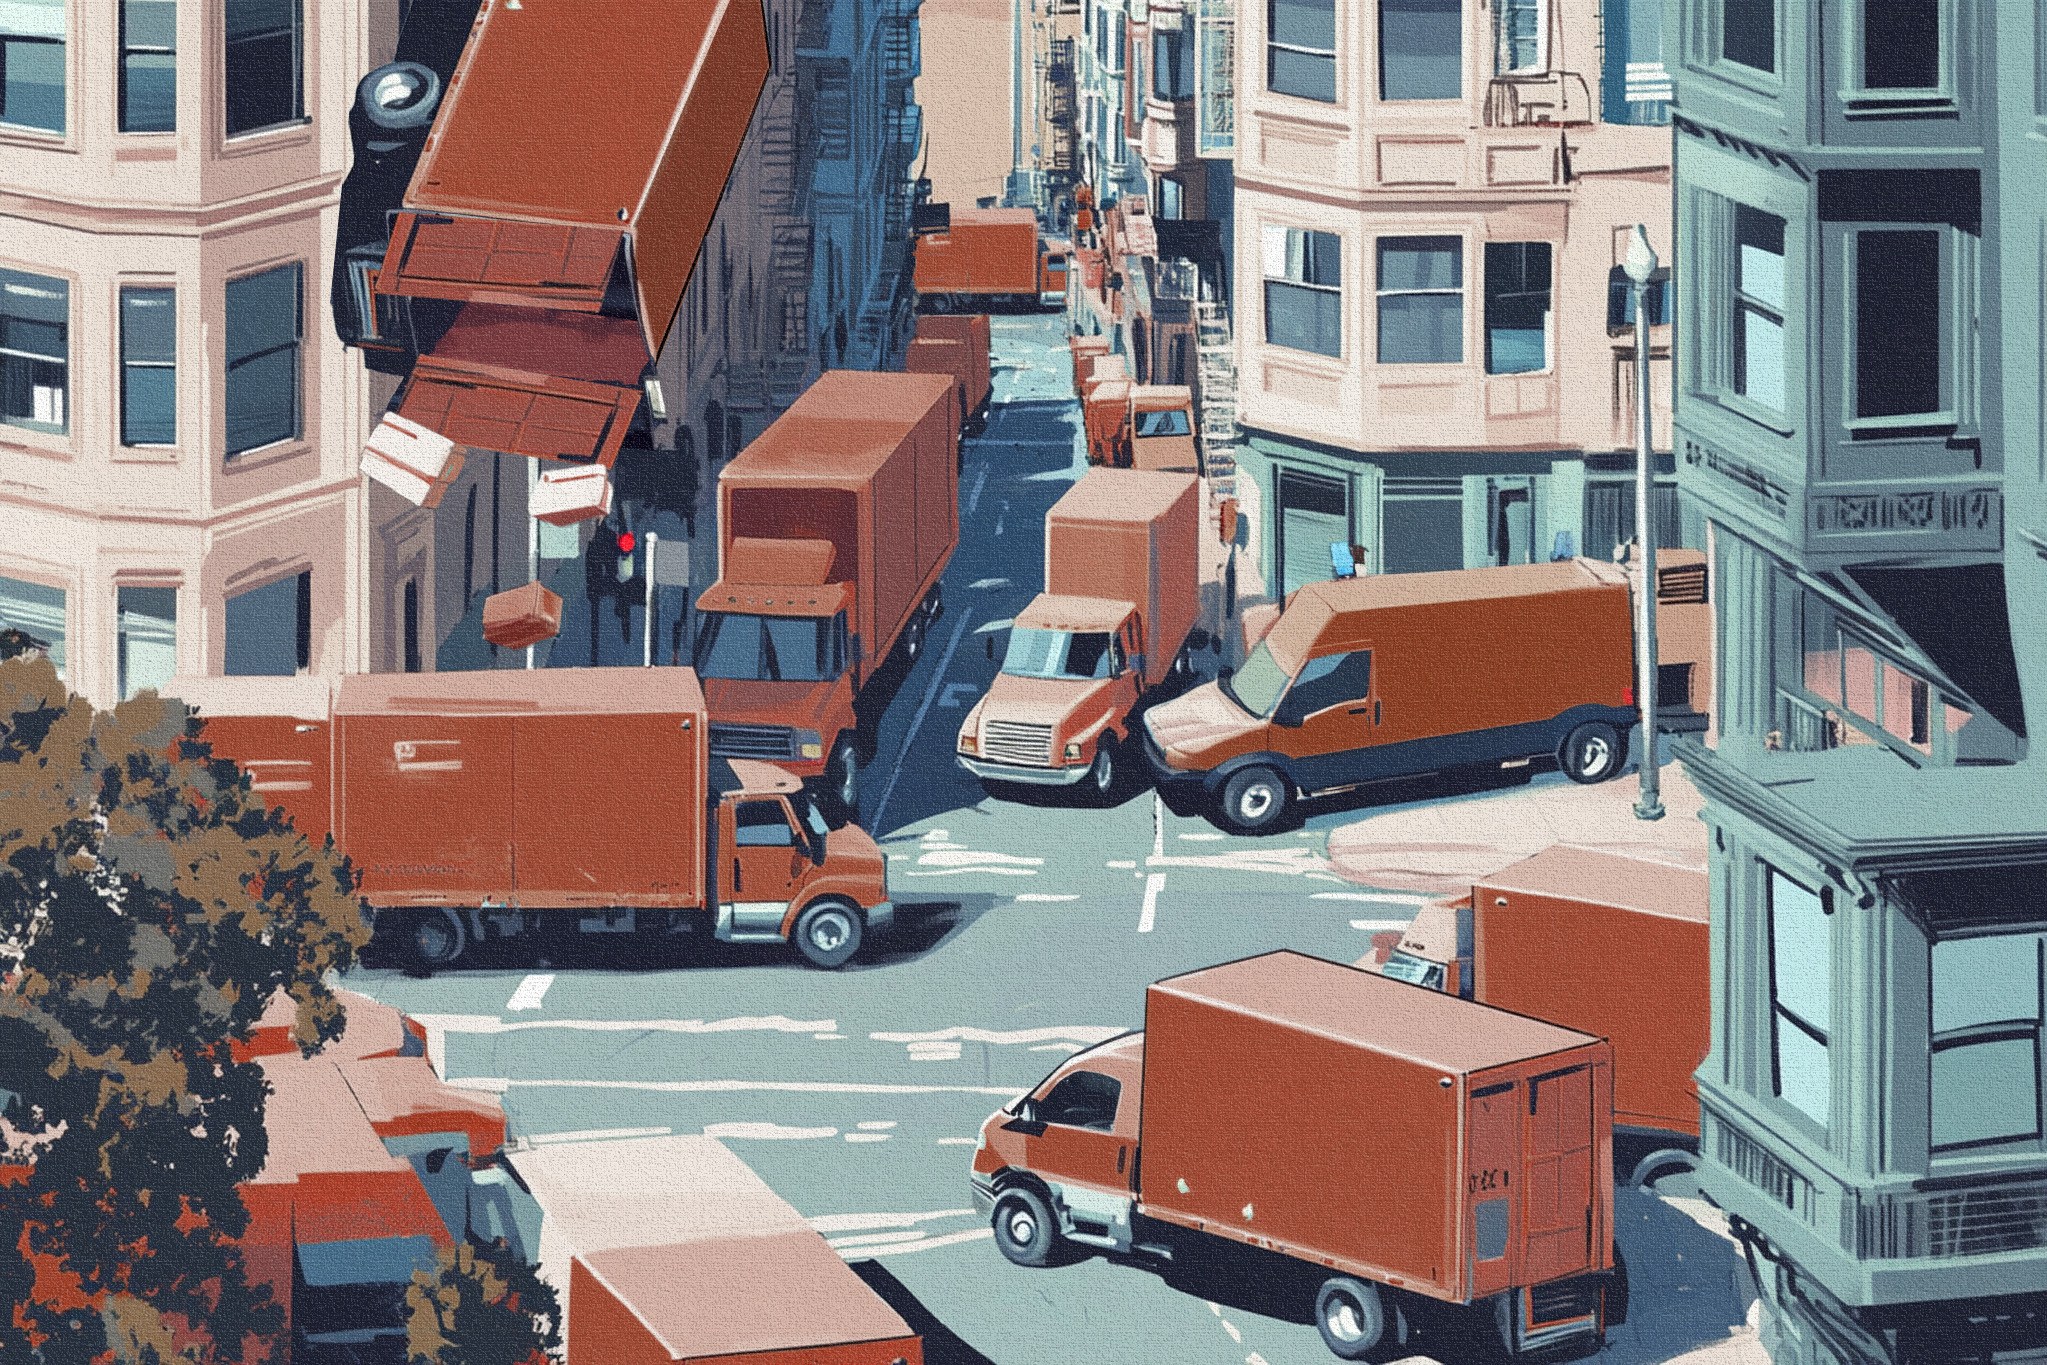 A city street corner is congested with numerous brown delivery trucks, creating a traffic jam amid tall, beige buildings with bay windows and a few trees.